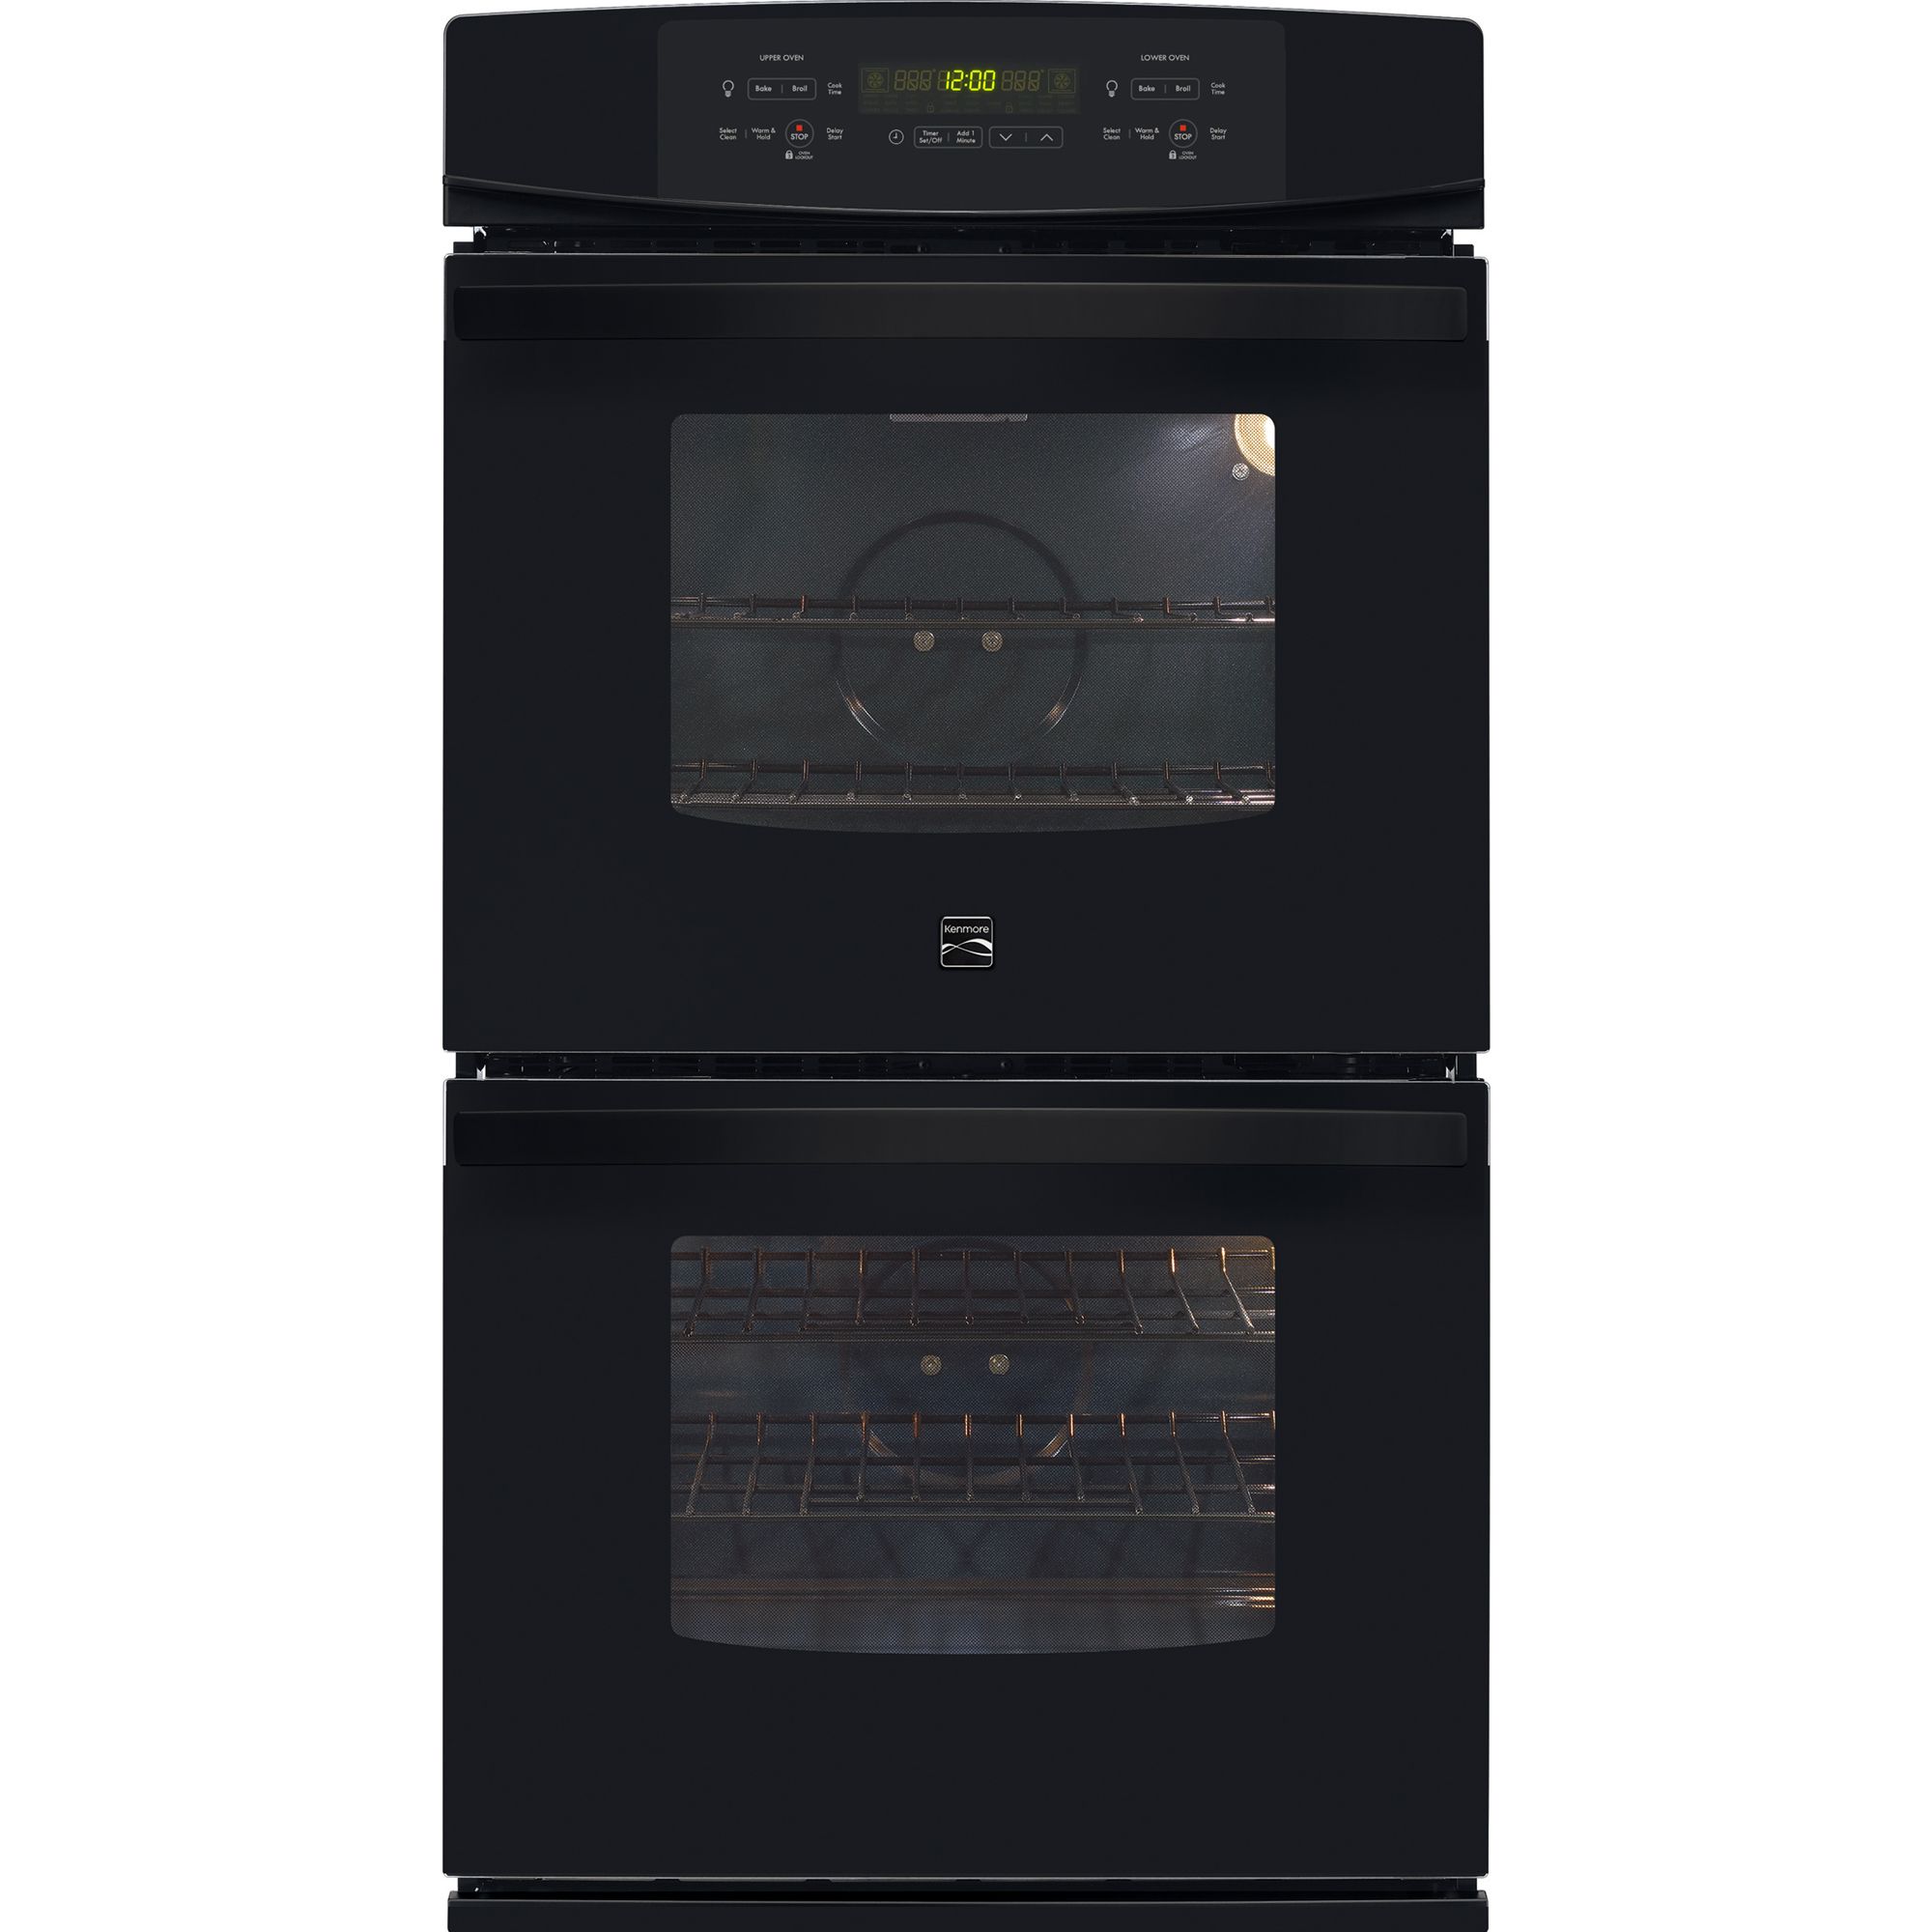 Kenmore 48779 30" Self-Clean Double Electric Wall Oven